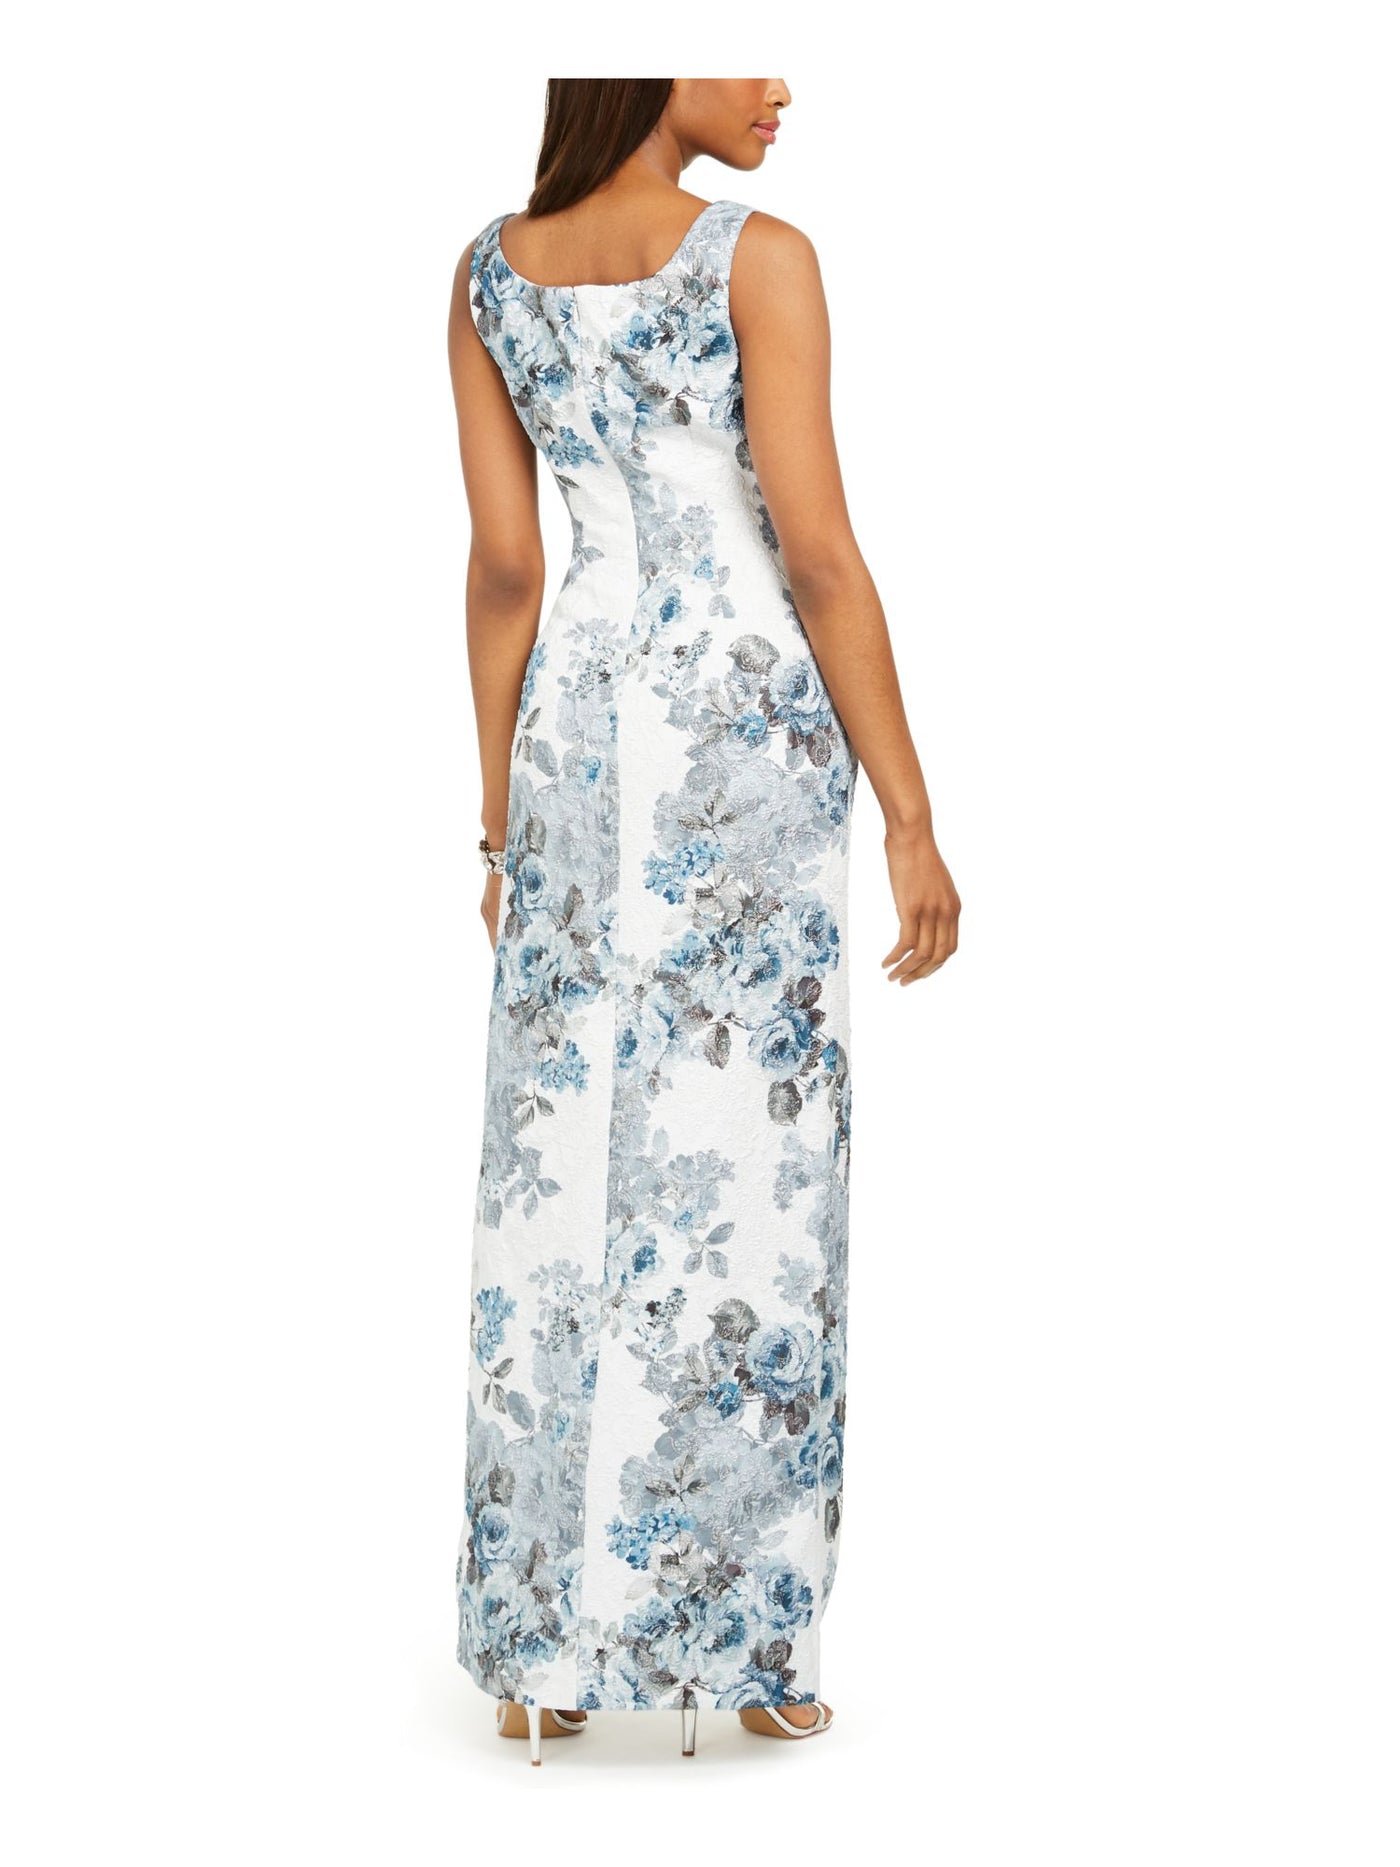 ADRIANNA PAPELL Womens Blue Slitted Floral Sleeveless Scoop Neck Maxi Evening Sheath Dress 10